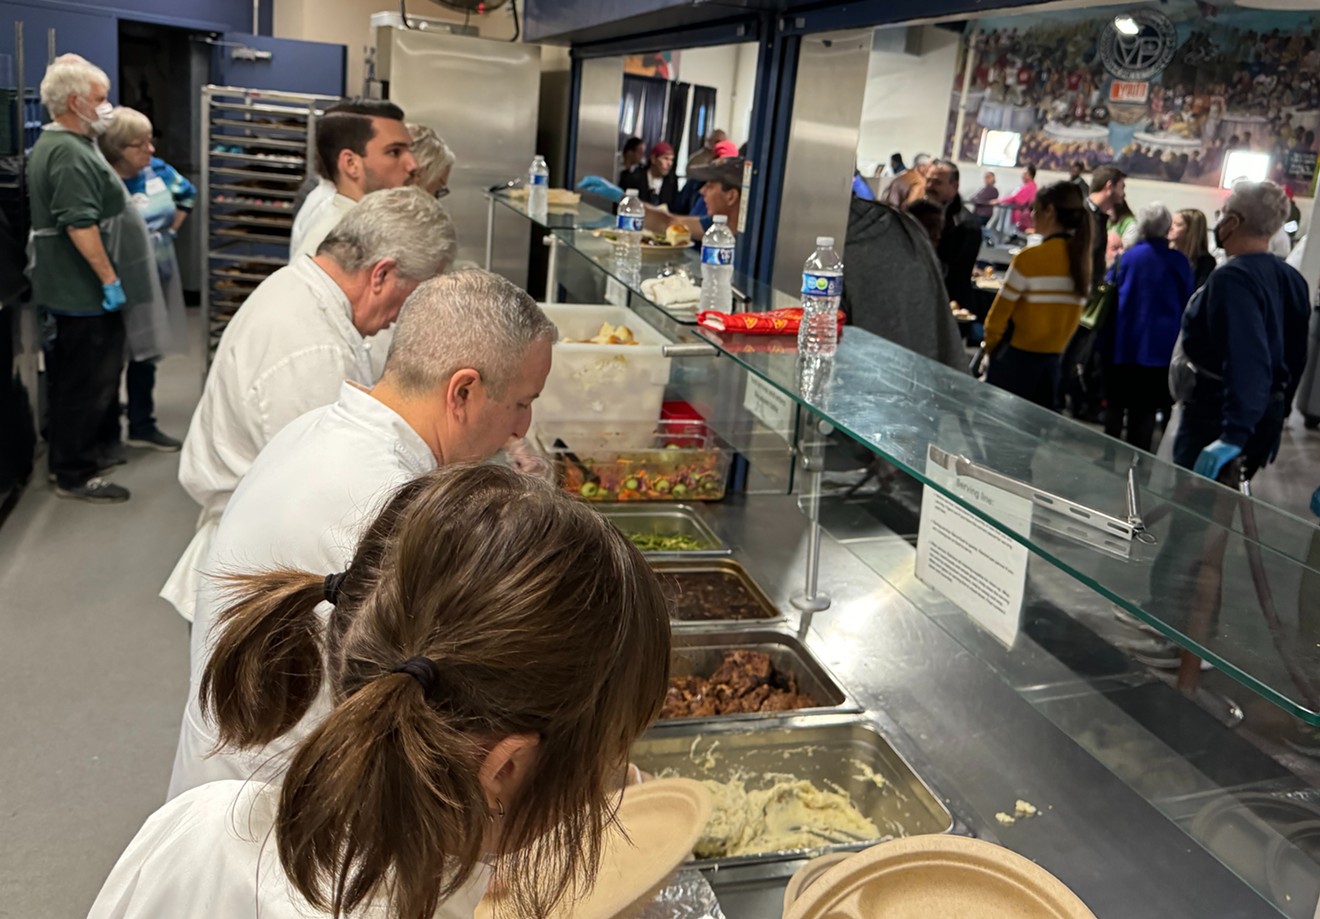 Several Valley chefs came together to create a steak lunch for more than 1,000 unsheltered people in Phoenix. The meal was hosted at St. Vincent de Paul in its downtown Phoenix location as part of the Key Campus (formerly the Human Services Campus).